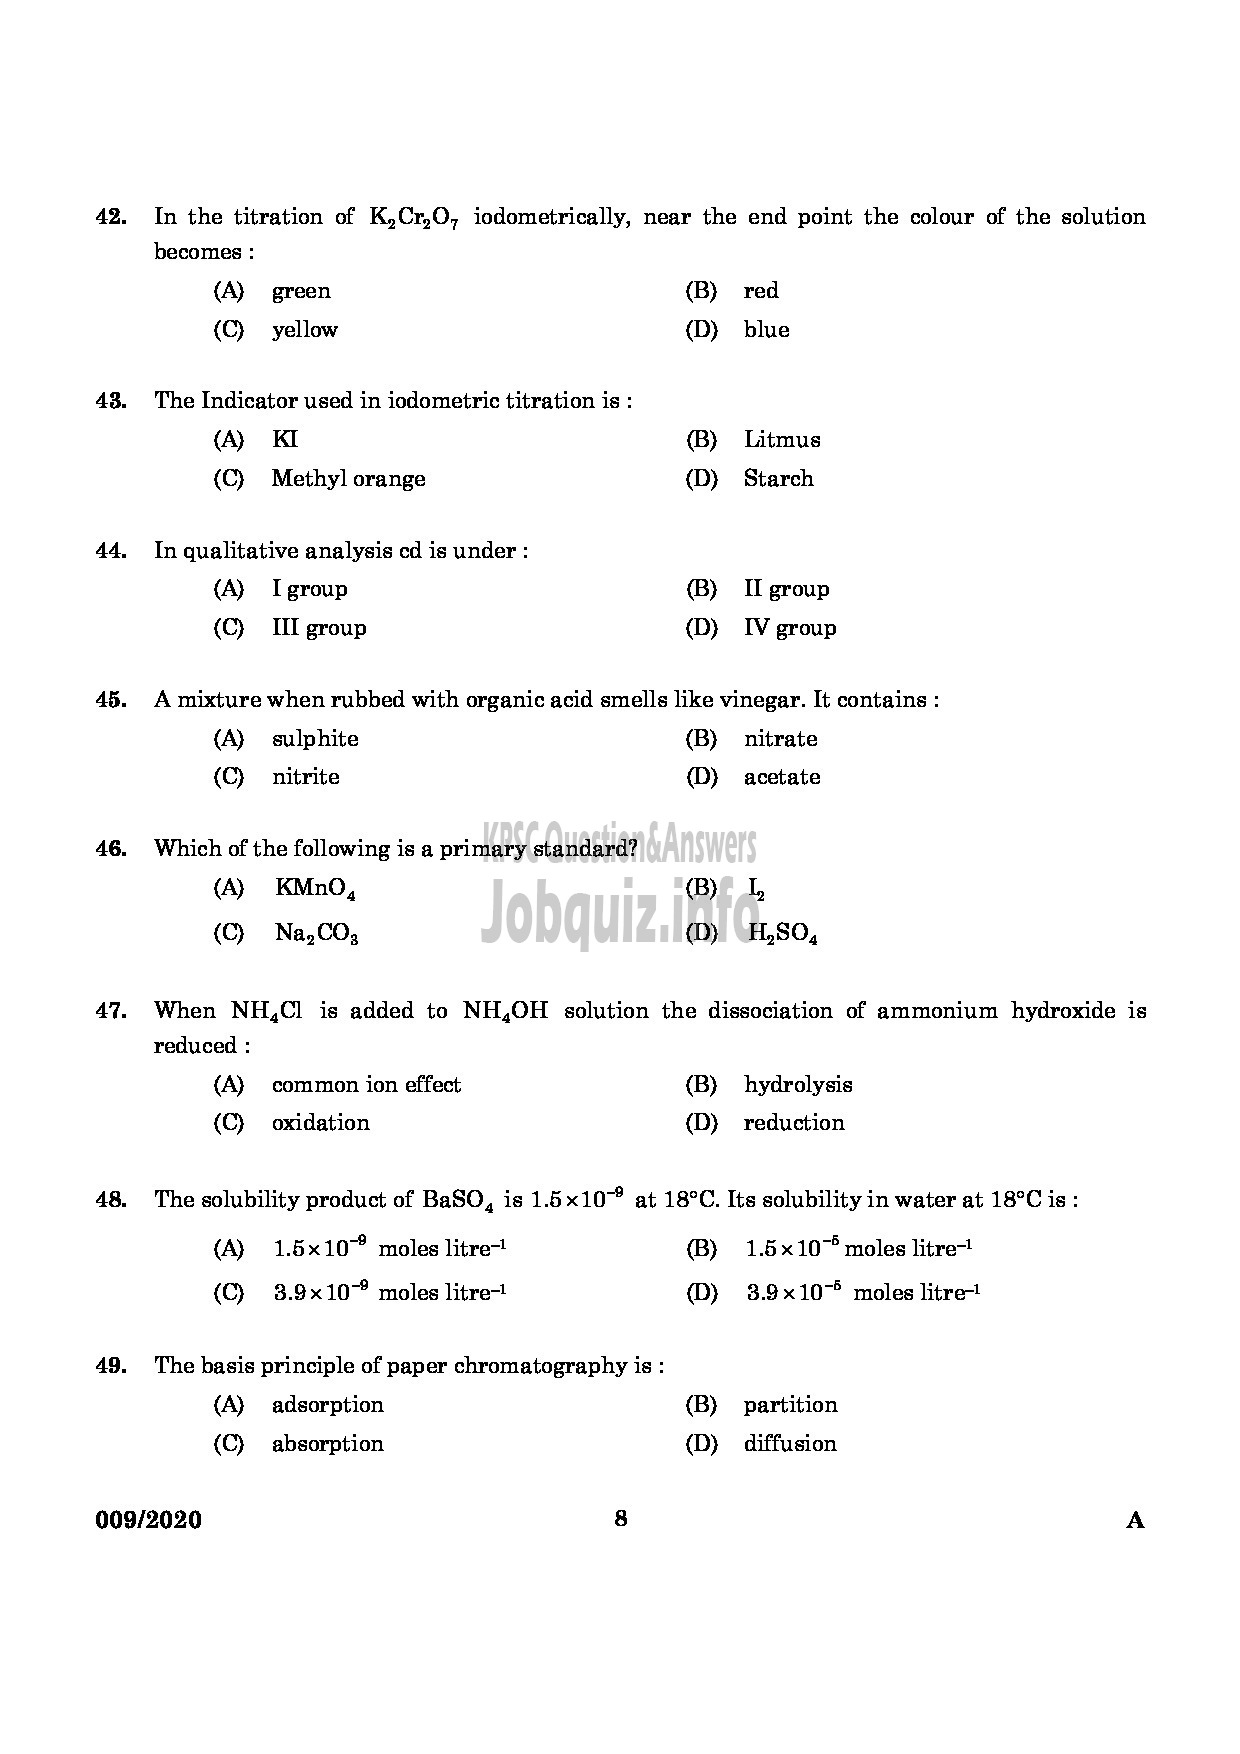 Kerala PSC Question Paper - CHEMIST IN FACTORIES AND BOILERS ENGLISH -6